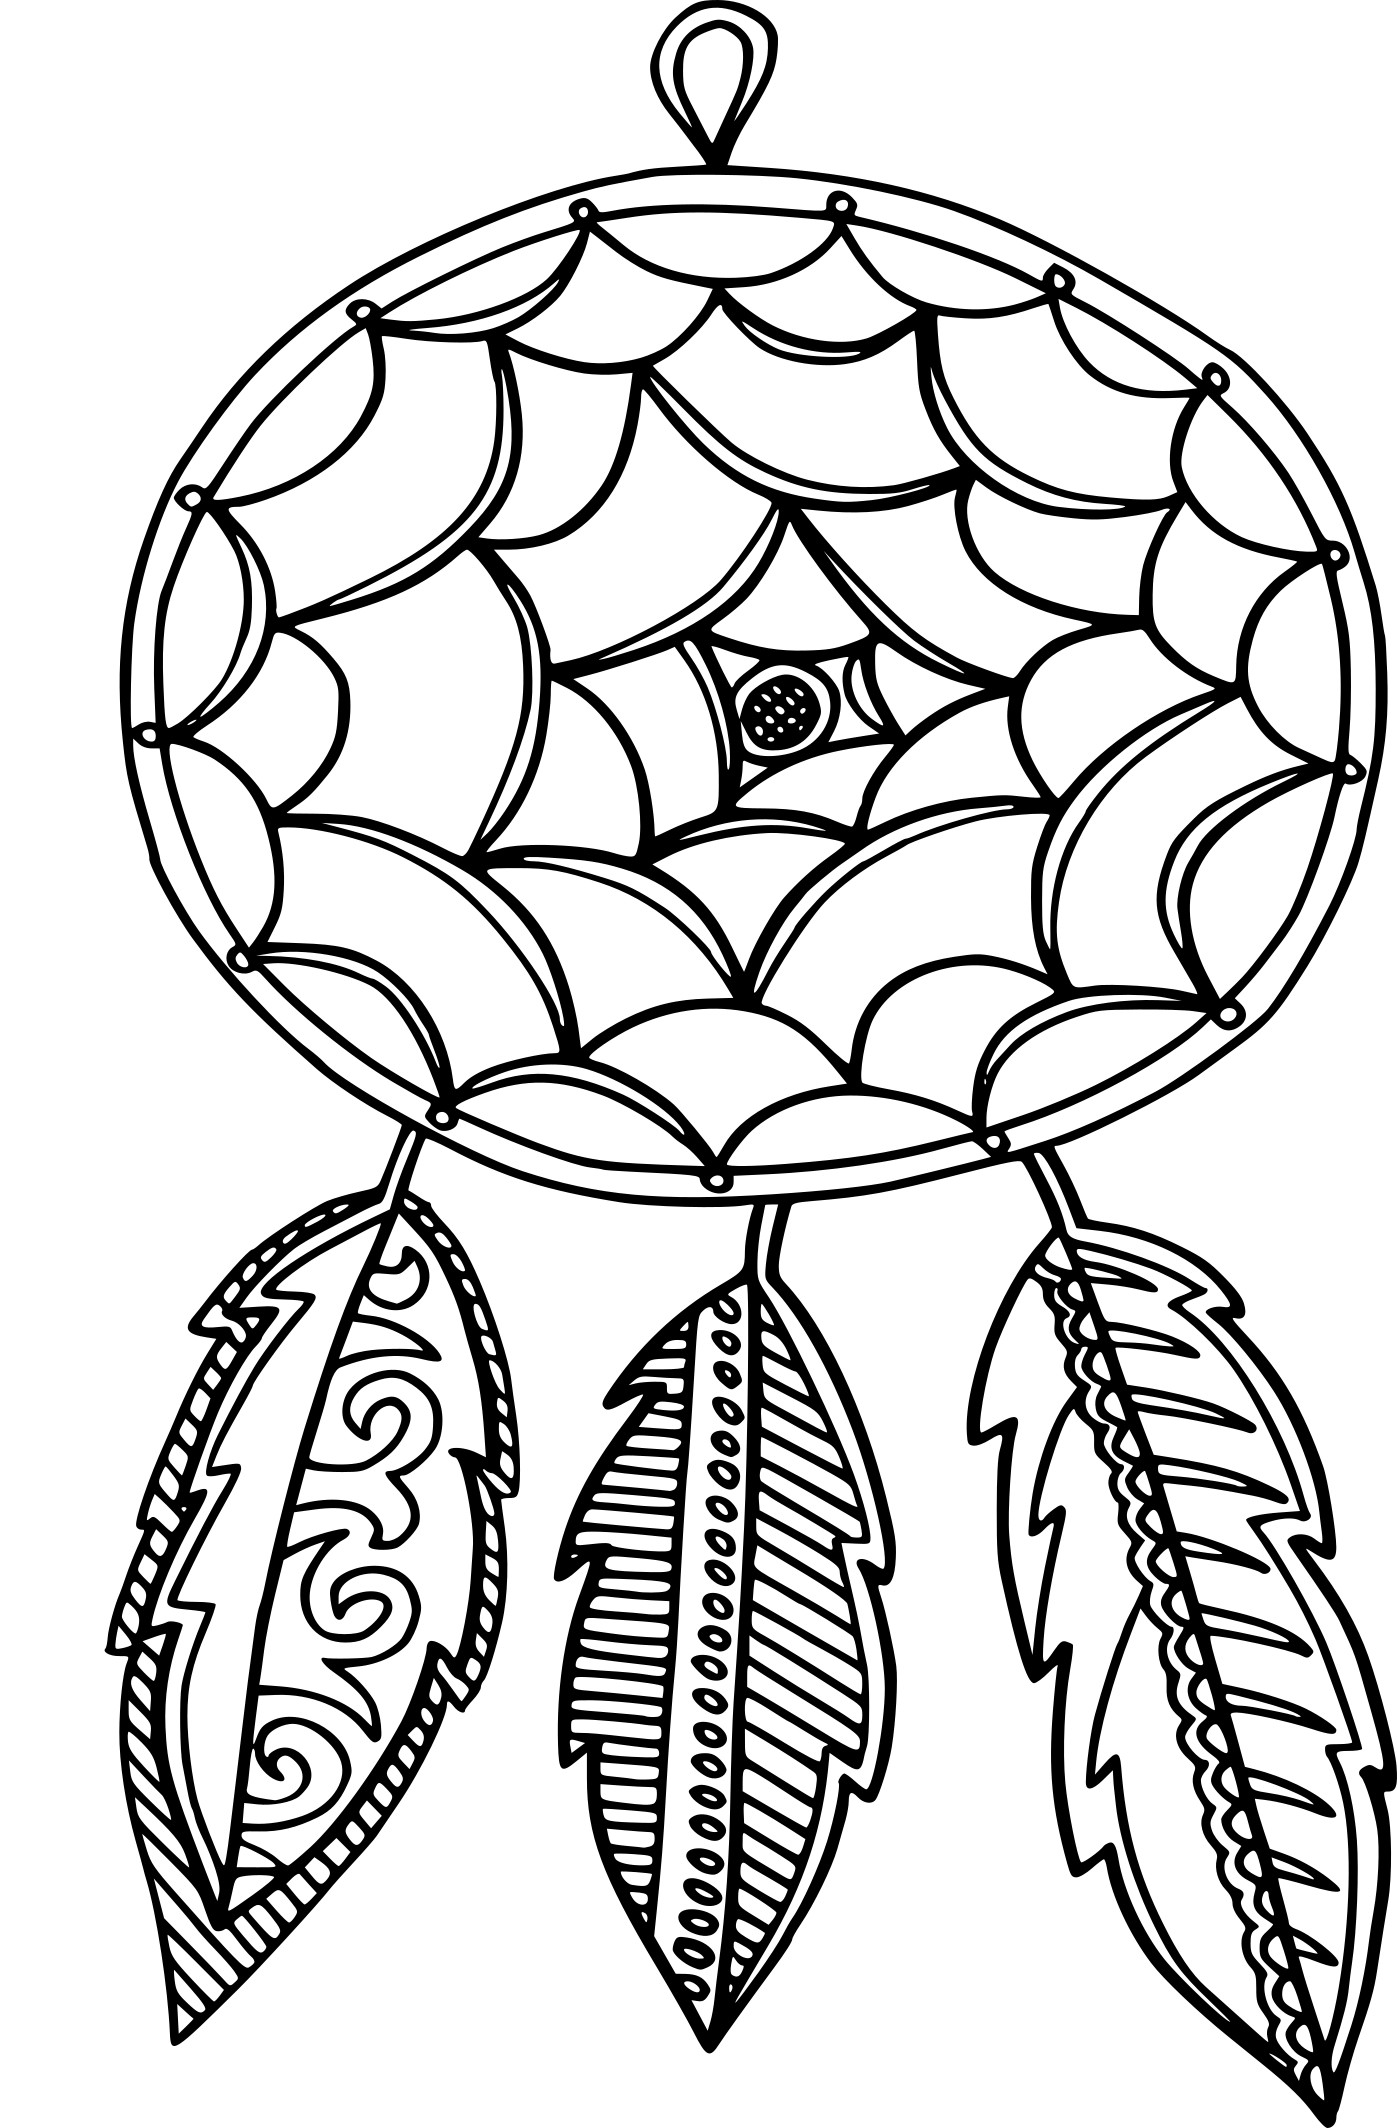 Dream Catcher coloring page